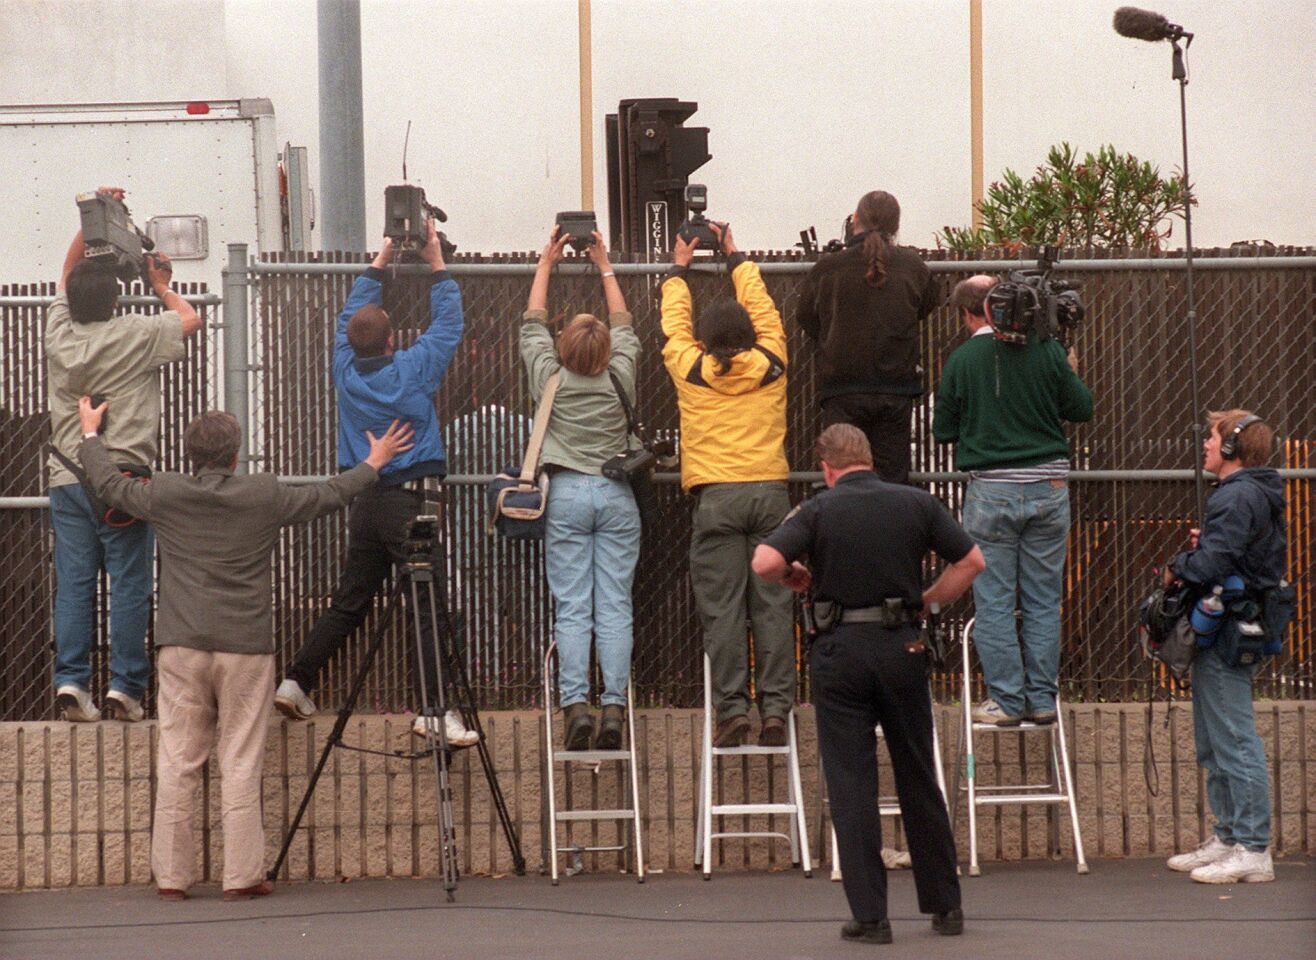 Photographers did what they could to get their cameras over a chain link fence to shoot photos of bodies being unloaded at the Medical Examiner's Office in Kearny Mesa on March 27, 1997. The day before the Heaven's Gate mass suicide was discovered inside a Rancho Santa Fe mansion.